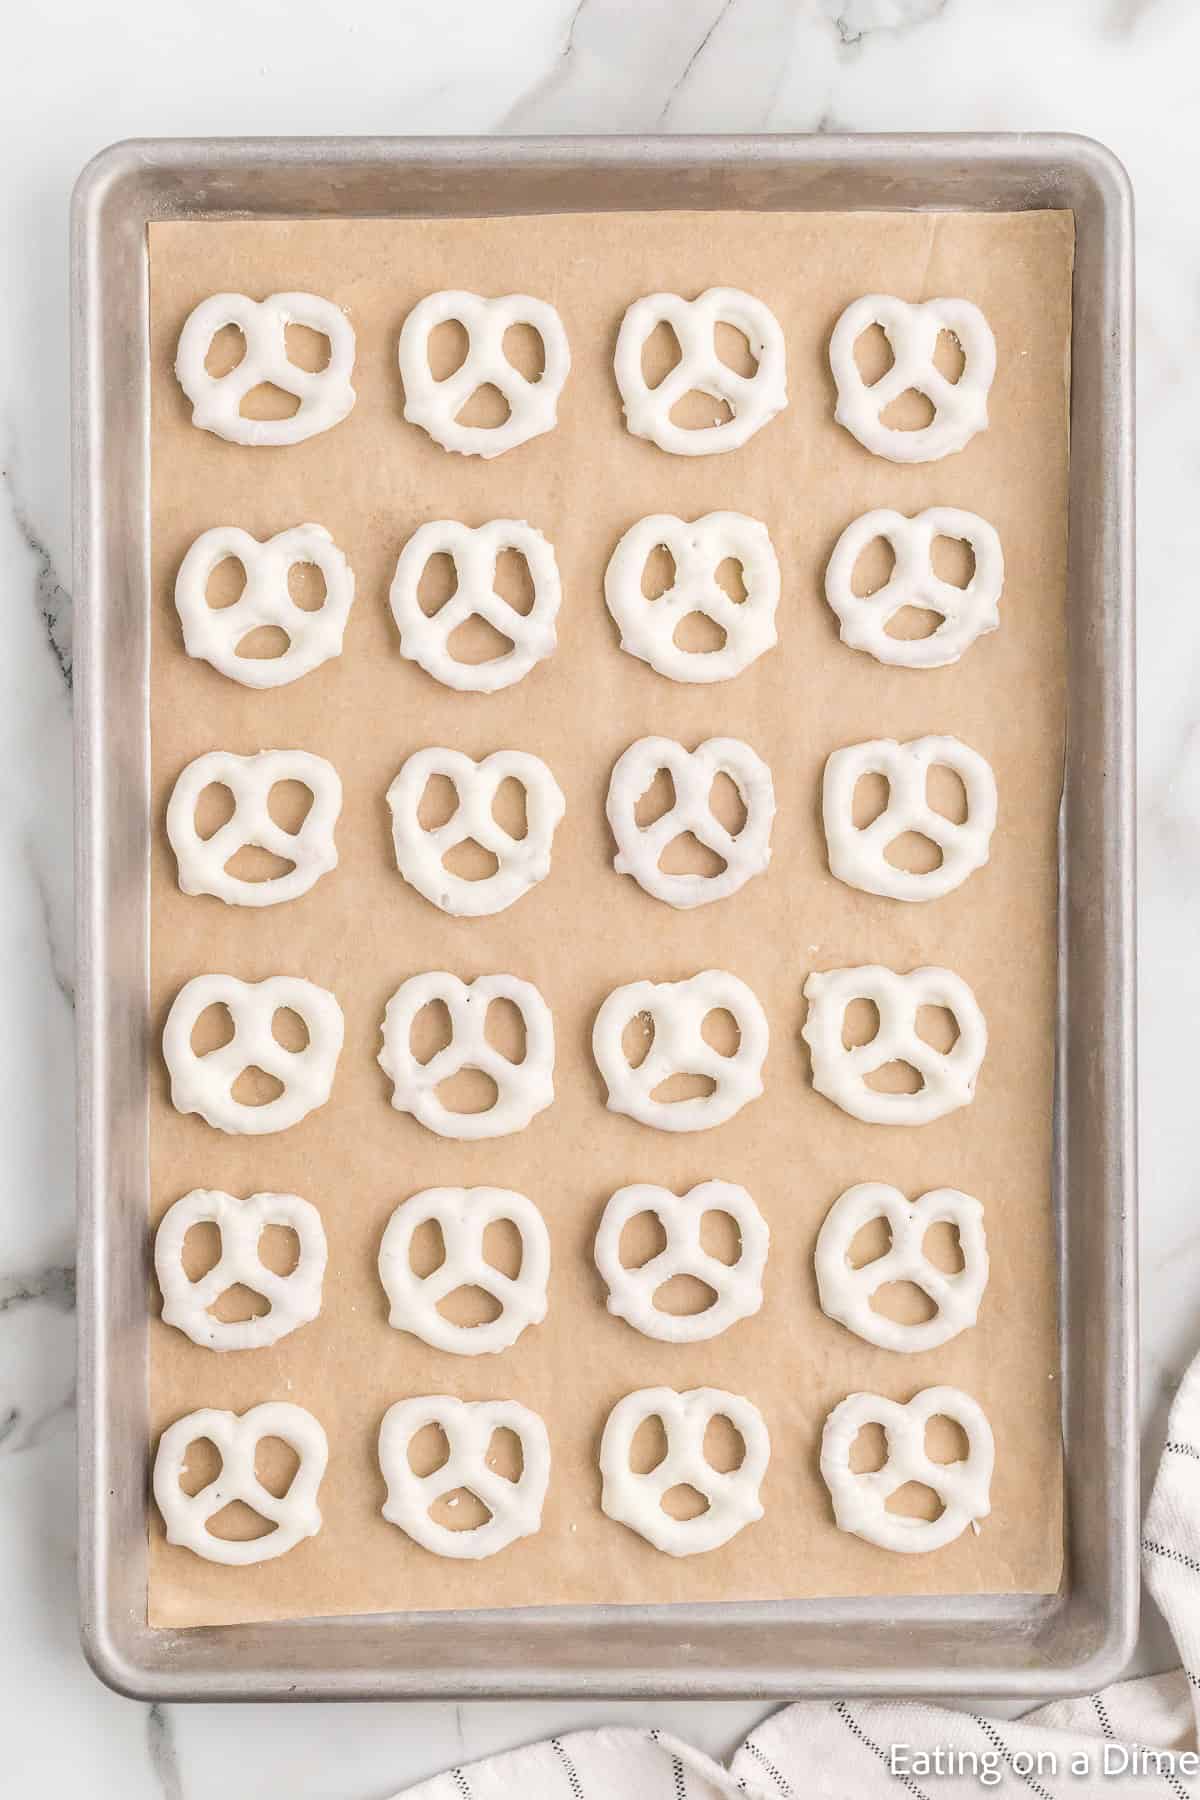 Placing the white chocolate pretzels on a baking sheet